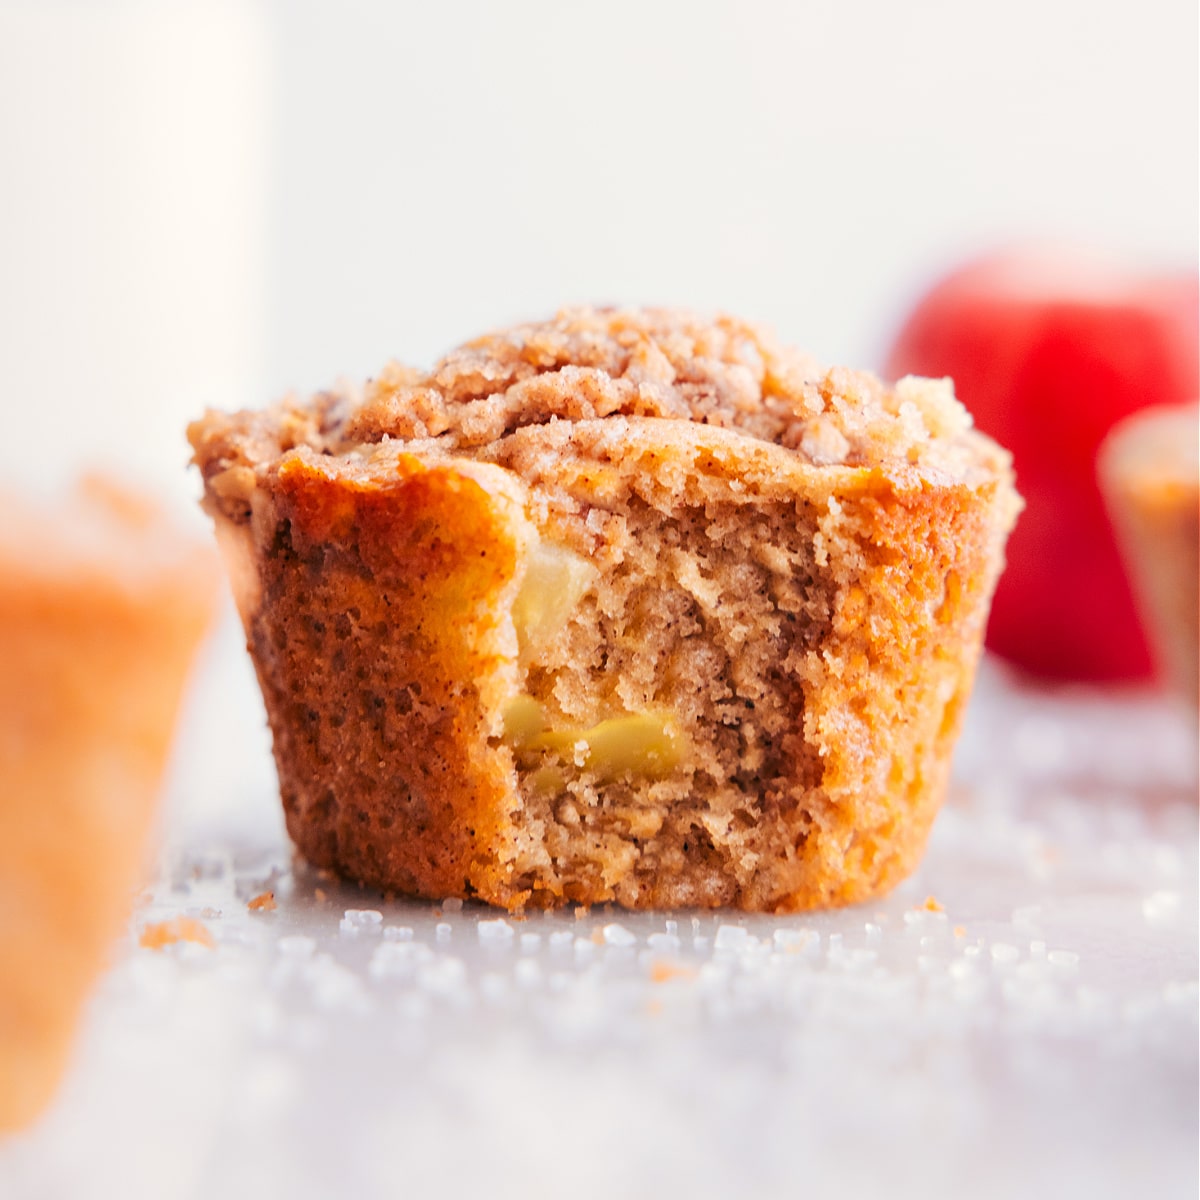 The finished apple cinnamon muffins, warm and aromatic, a perfect sweet and healthy breakfast.